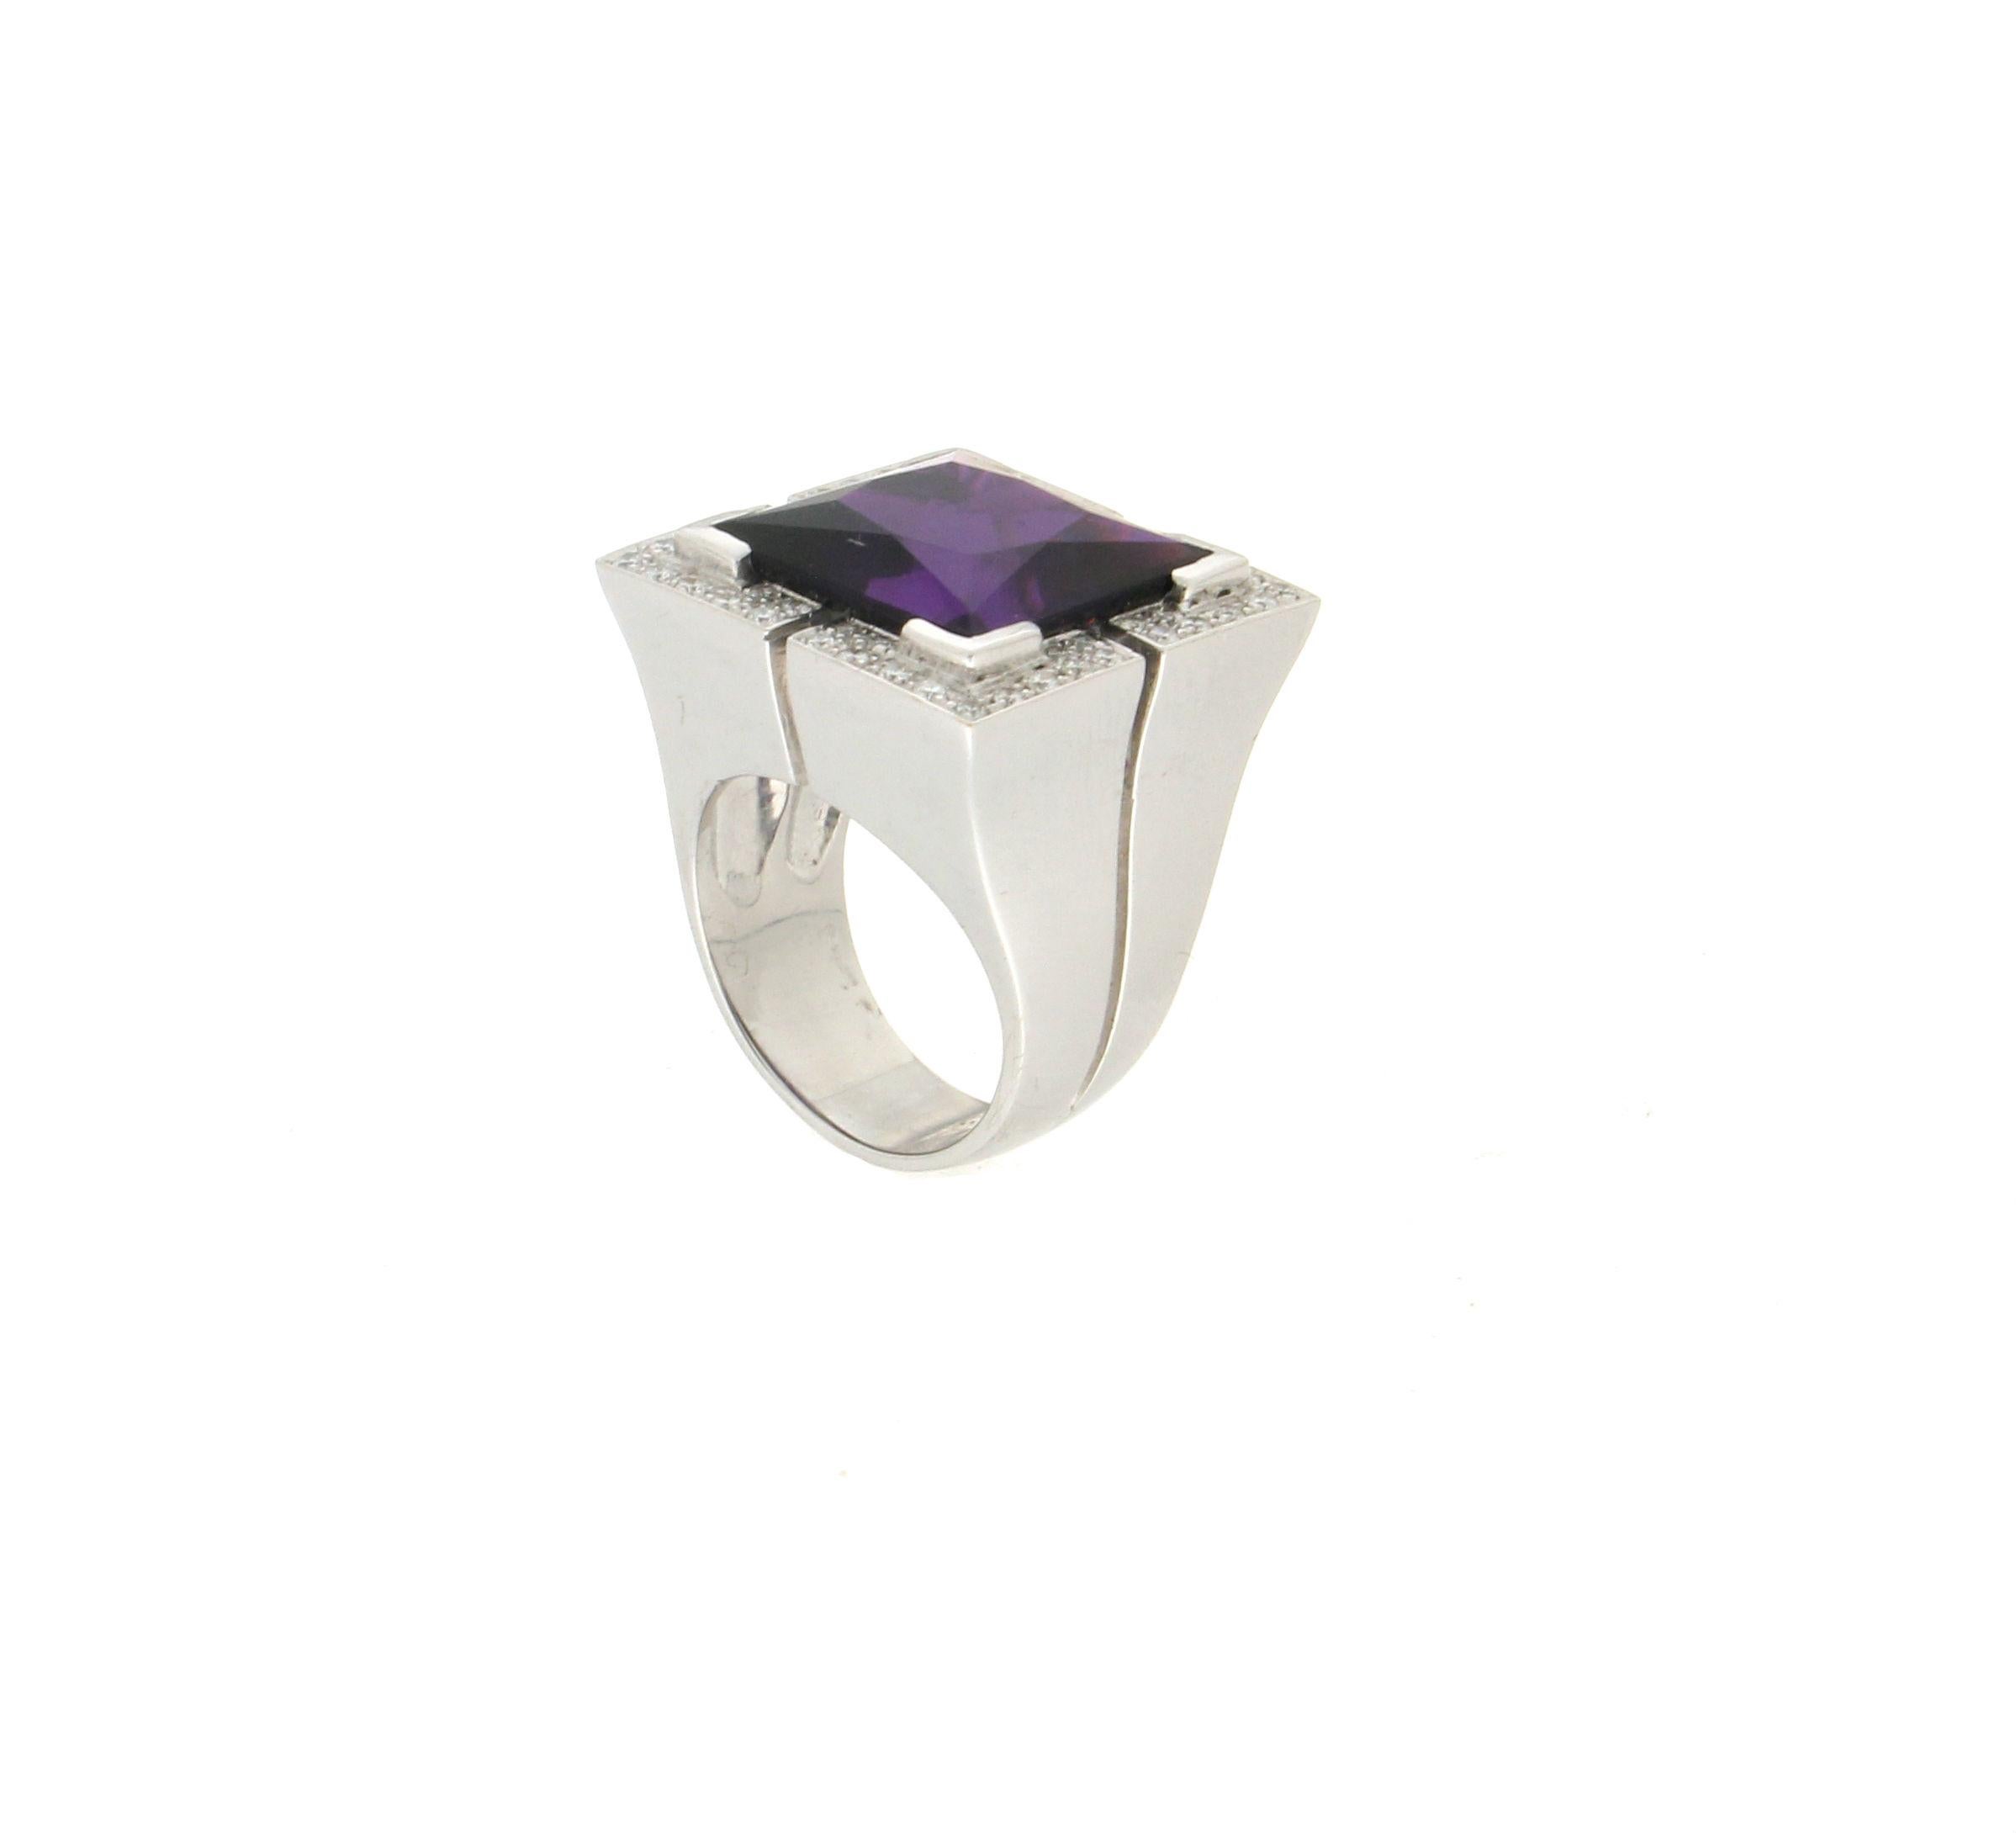 18 karat white gold cocktail ring. Handmade by our artisans assembled with diamonds and square amethyst

Diamonds weight 0.70 karat
Ring total weight 26.80 grams
Ring size 8.10 US 16.90 Ita
(all rings are can be resized)